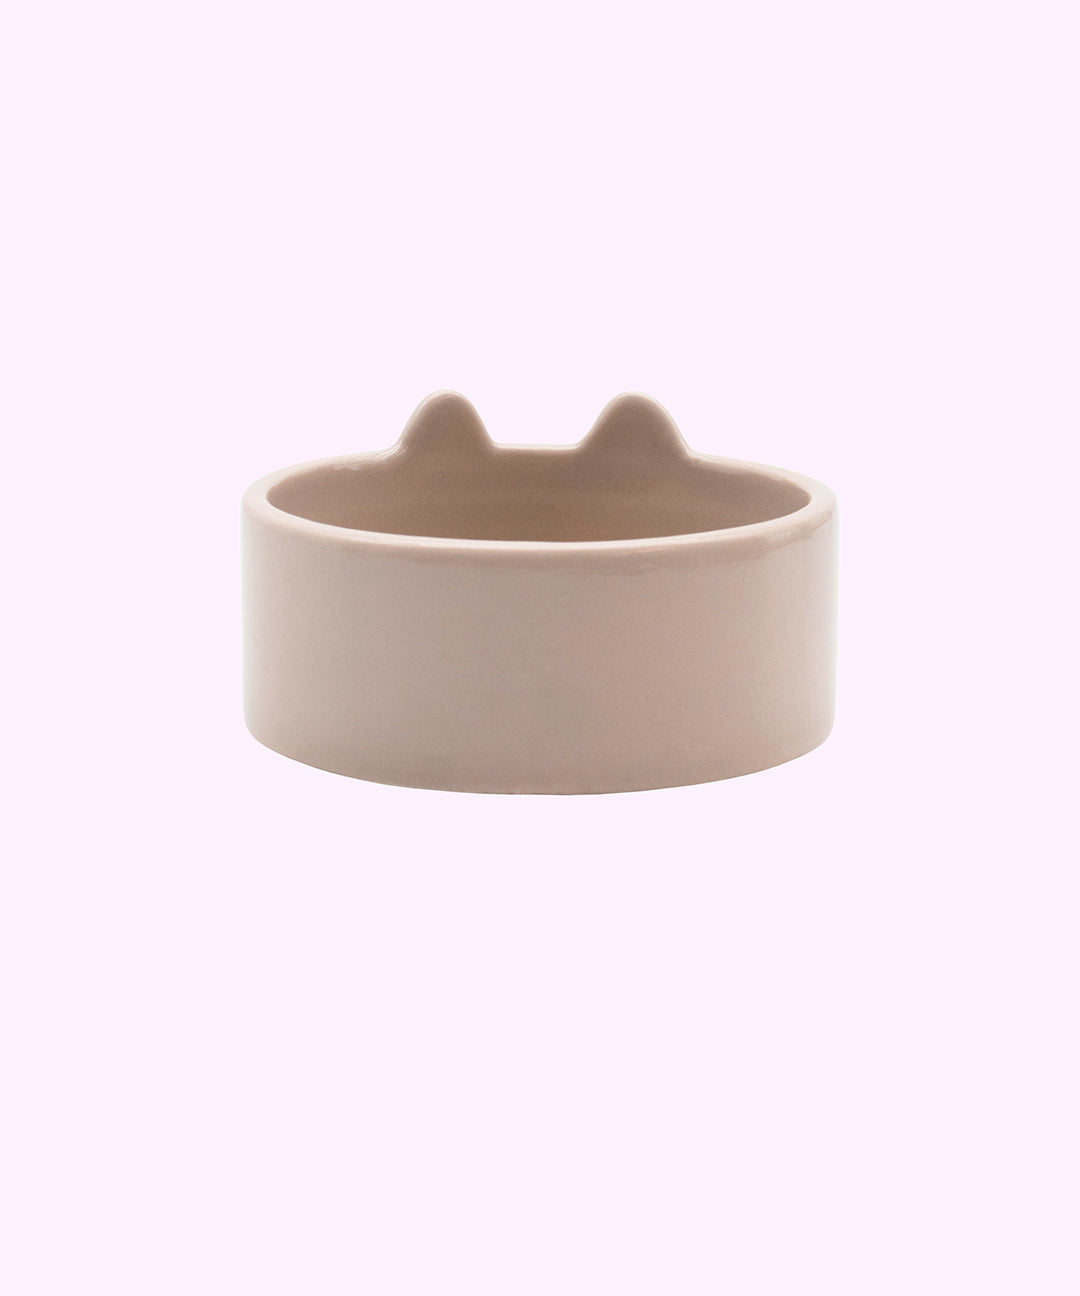 Back view of the light grey pet food and water bowl. The Pusheen Halloween Pet Bowl has a flat base and a circular shape with two rounded ears that extend from the top lip of the bowl.